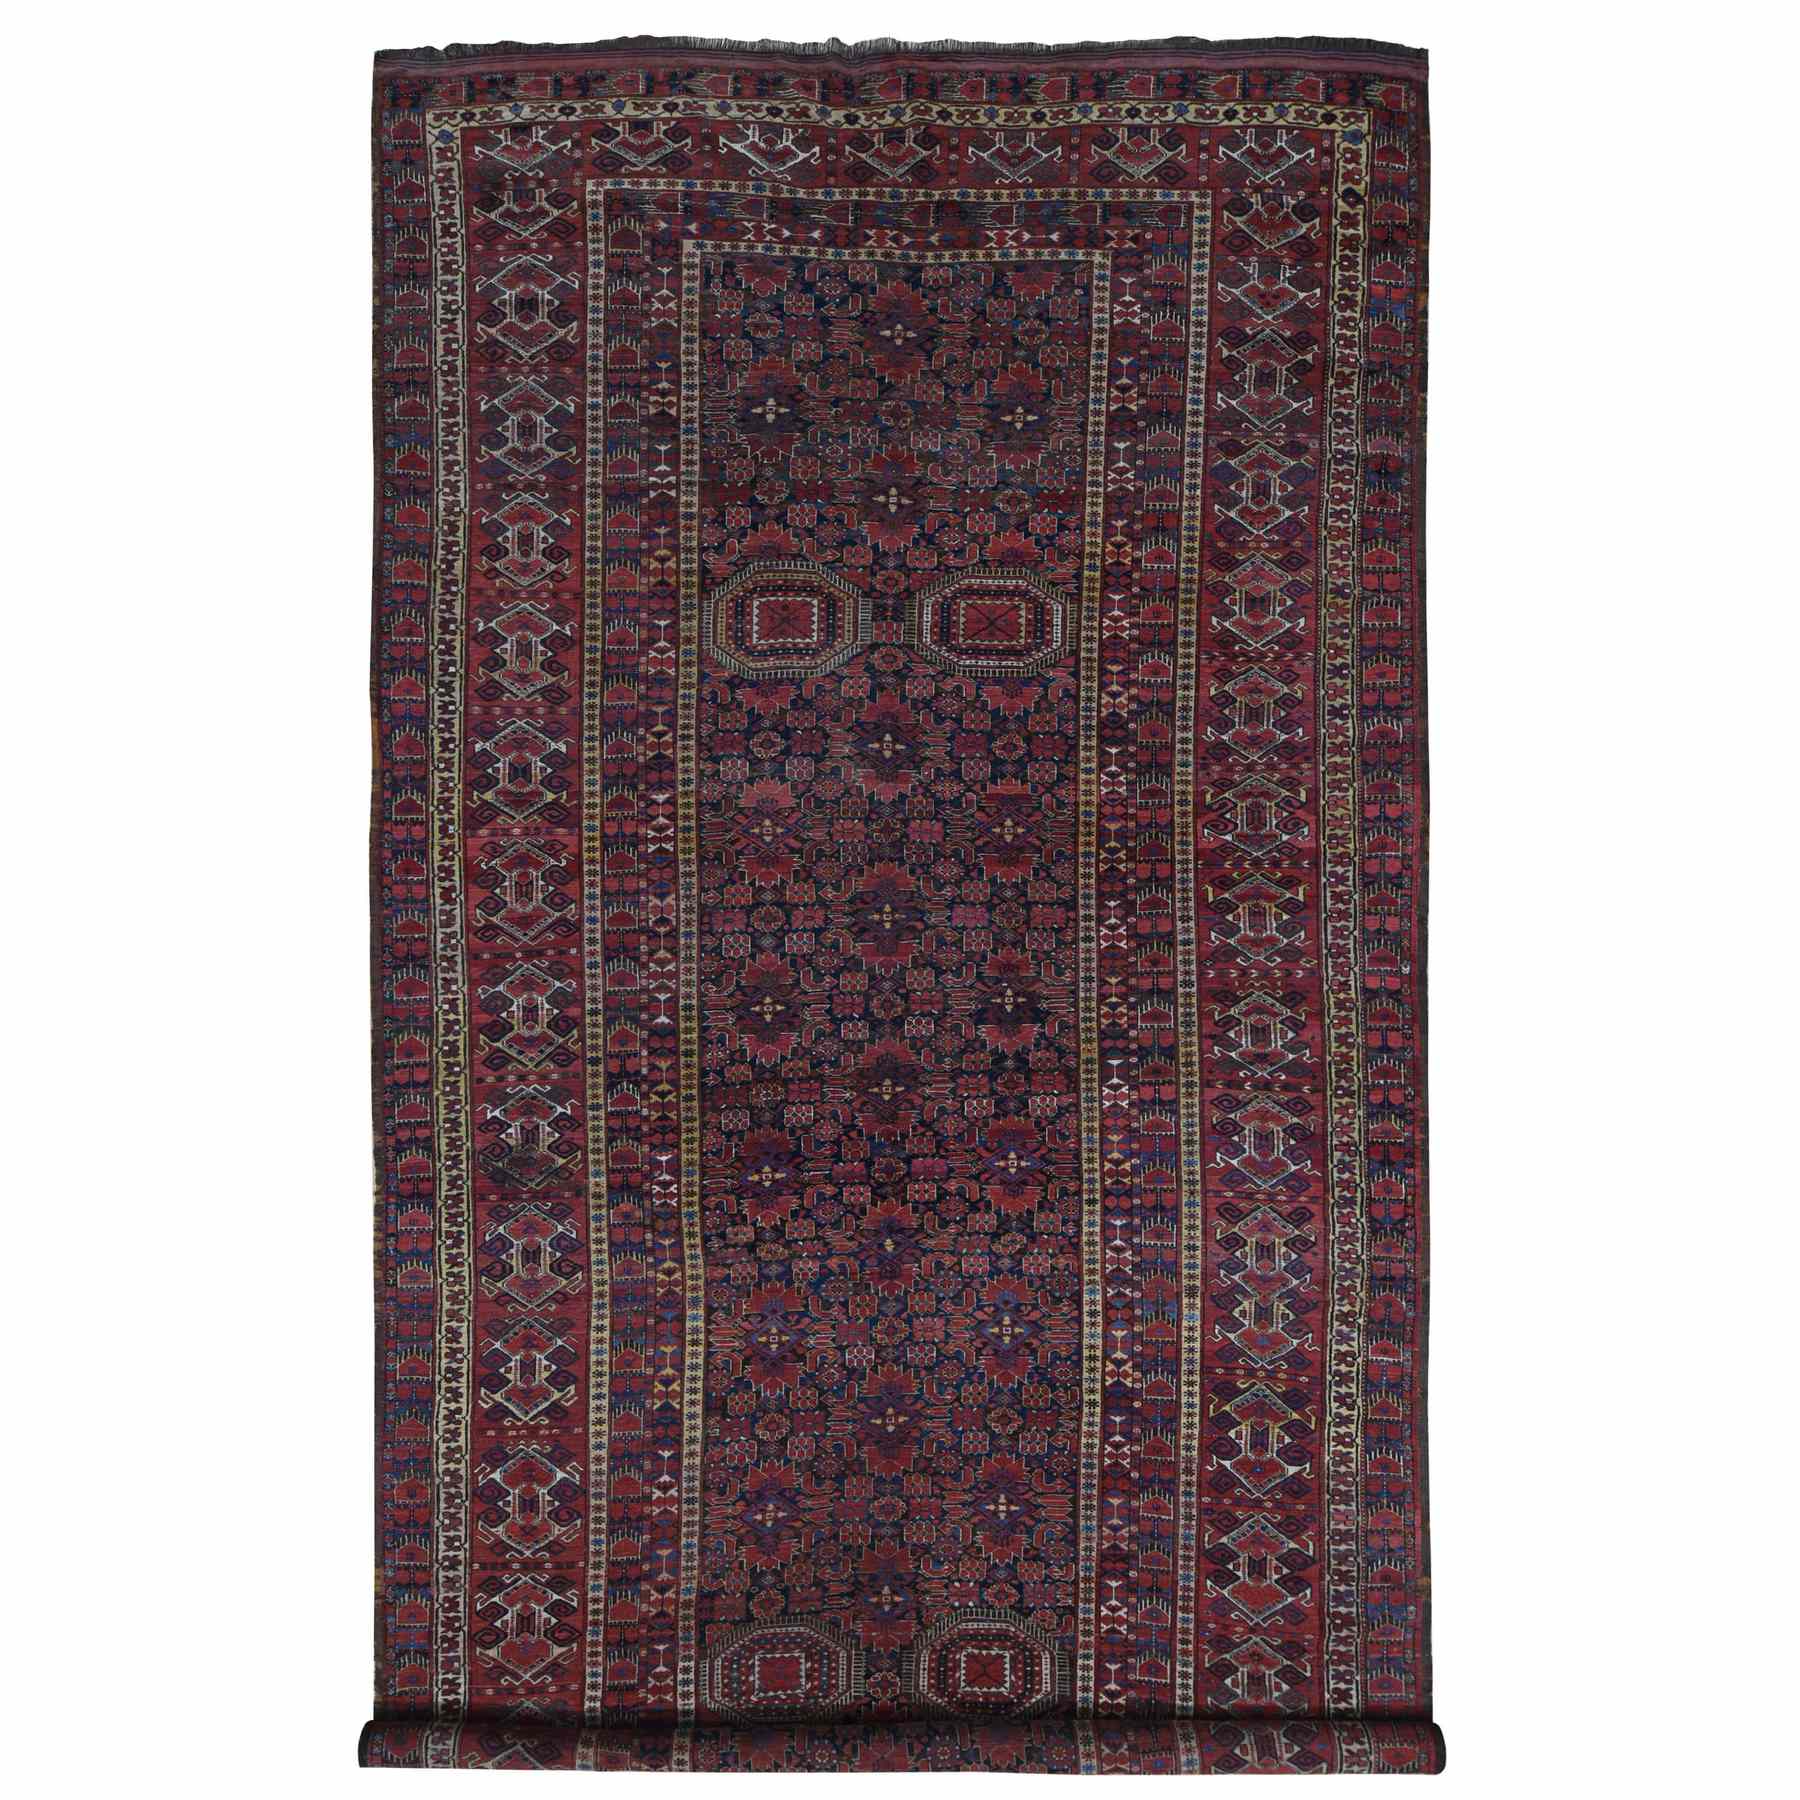 Antique-Hand-Knotted-Rug-401550